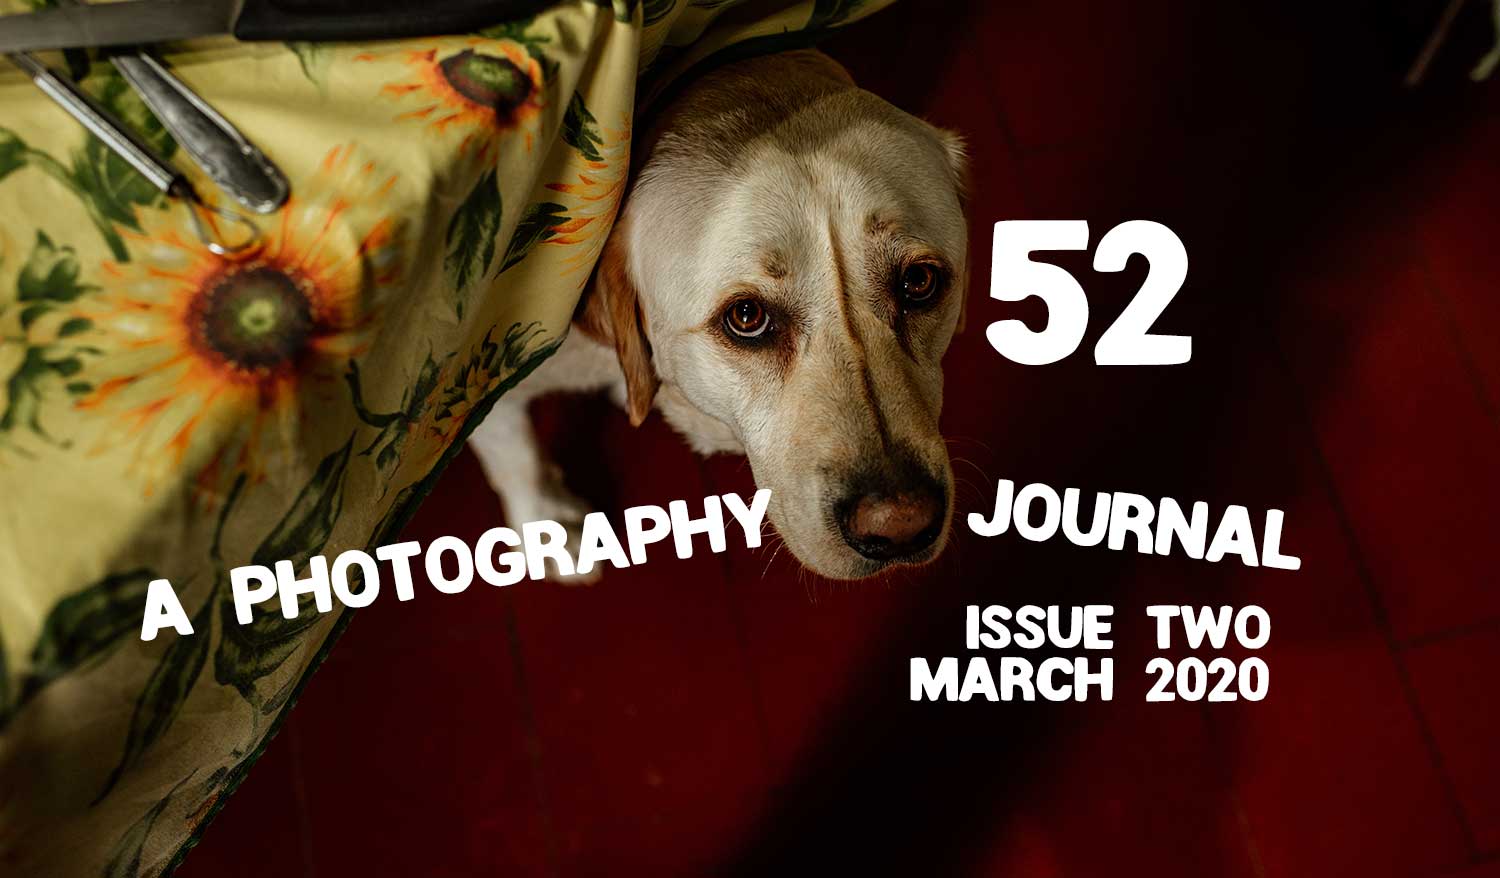 52: A PHOTOGRAPHY JOURNAL: ISSUE TWO